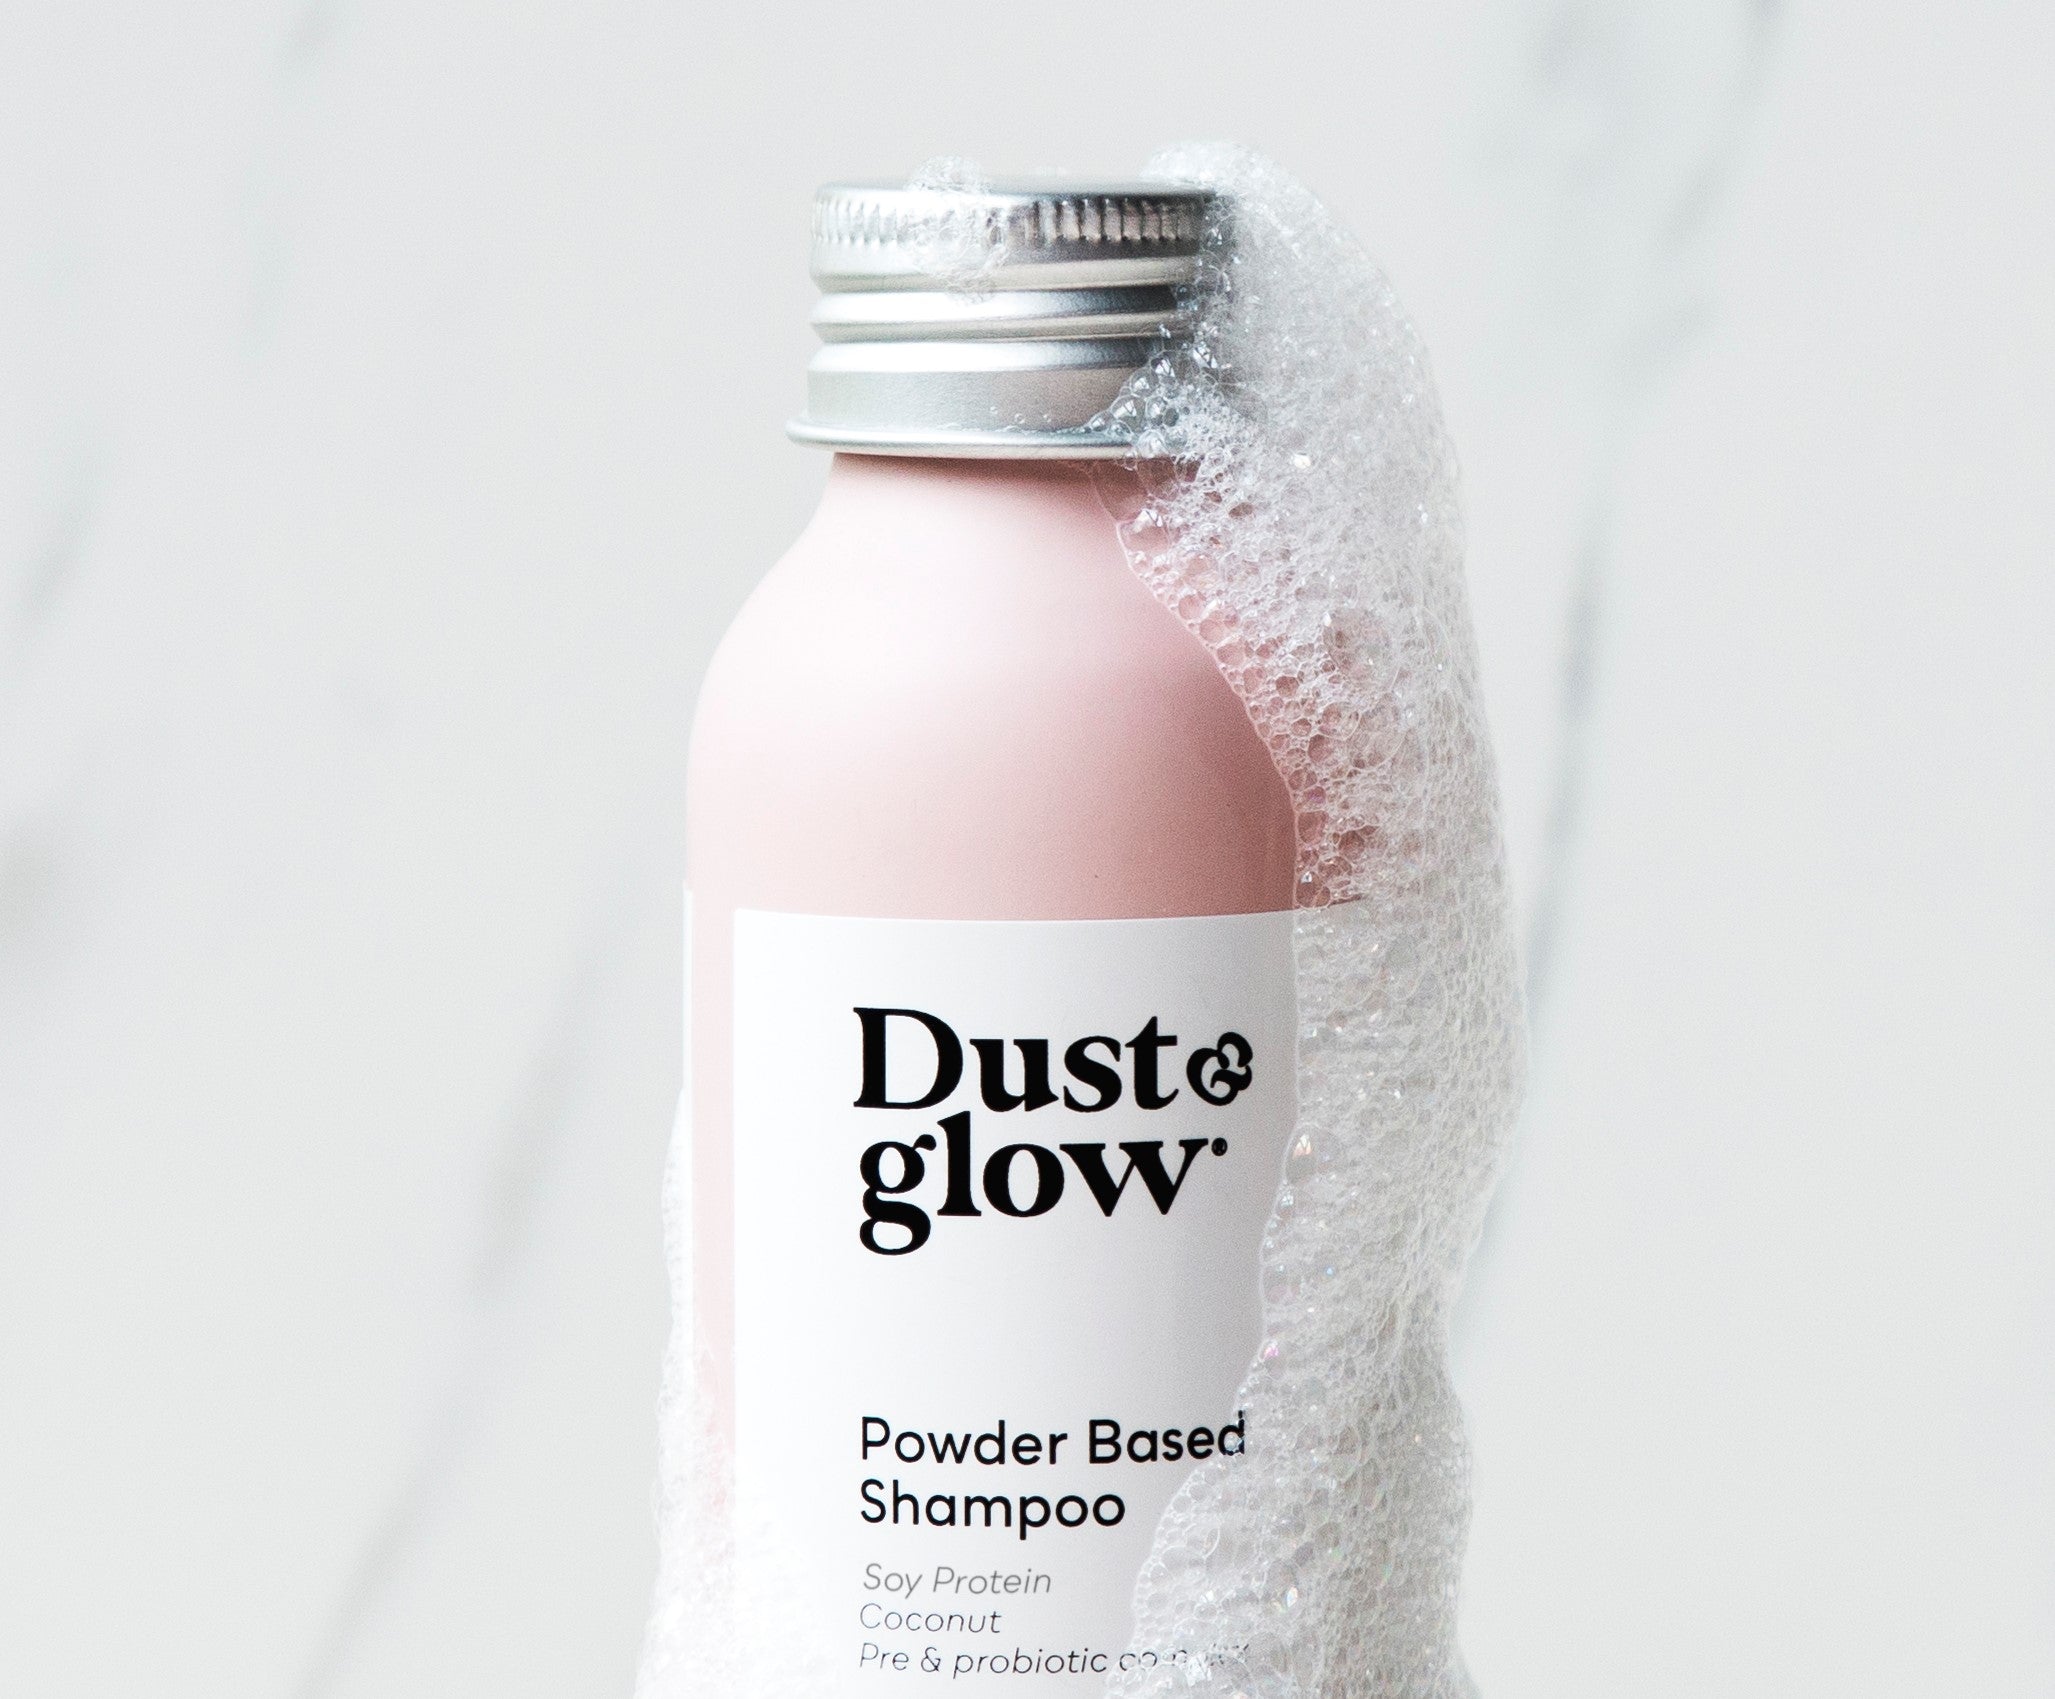 lede efter Transplant Indlejre 5 reasons to switch to a powder-based shampoo – Dust & Glow